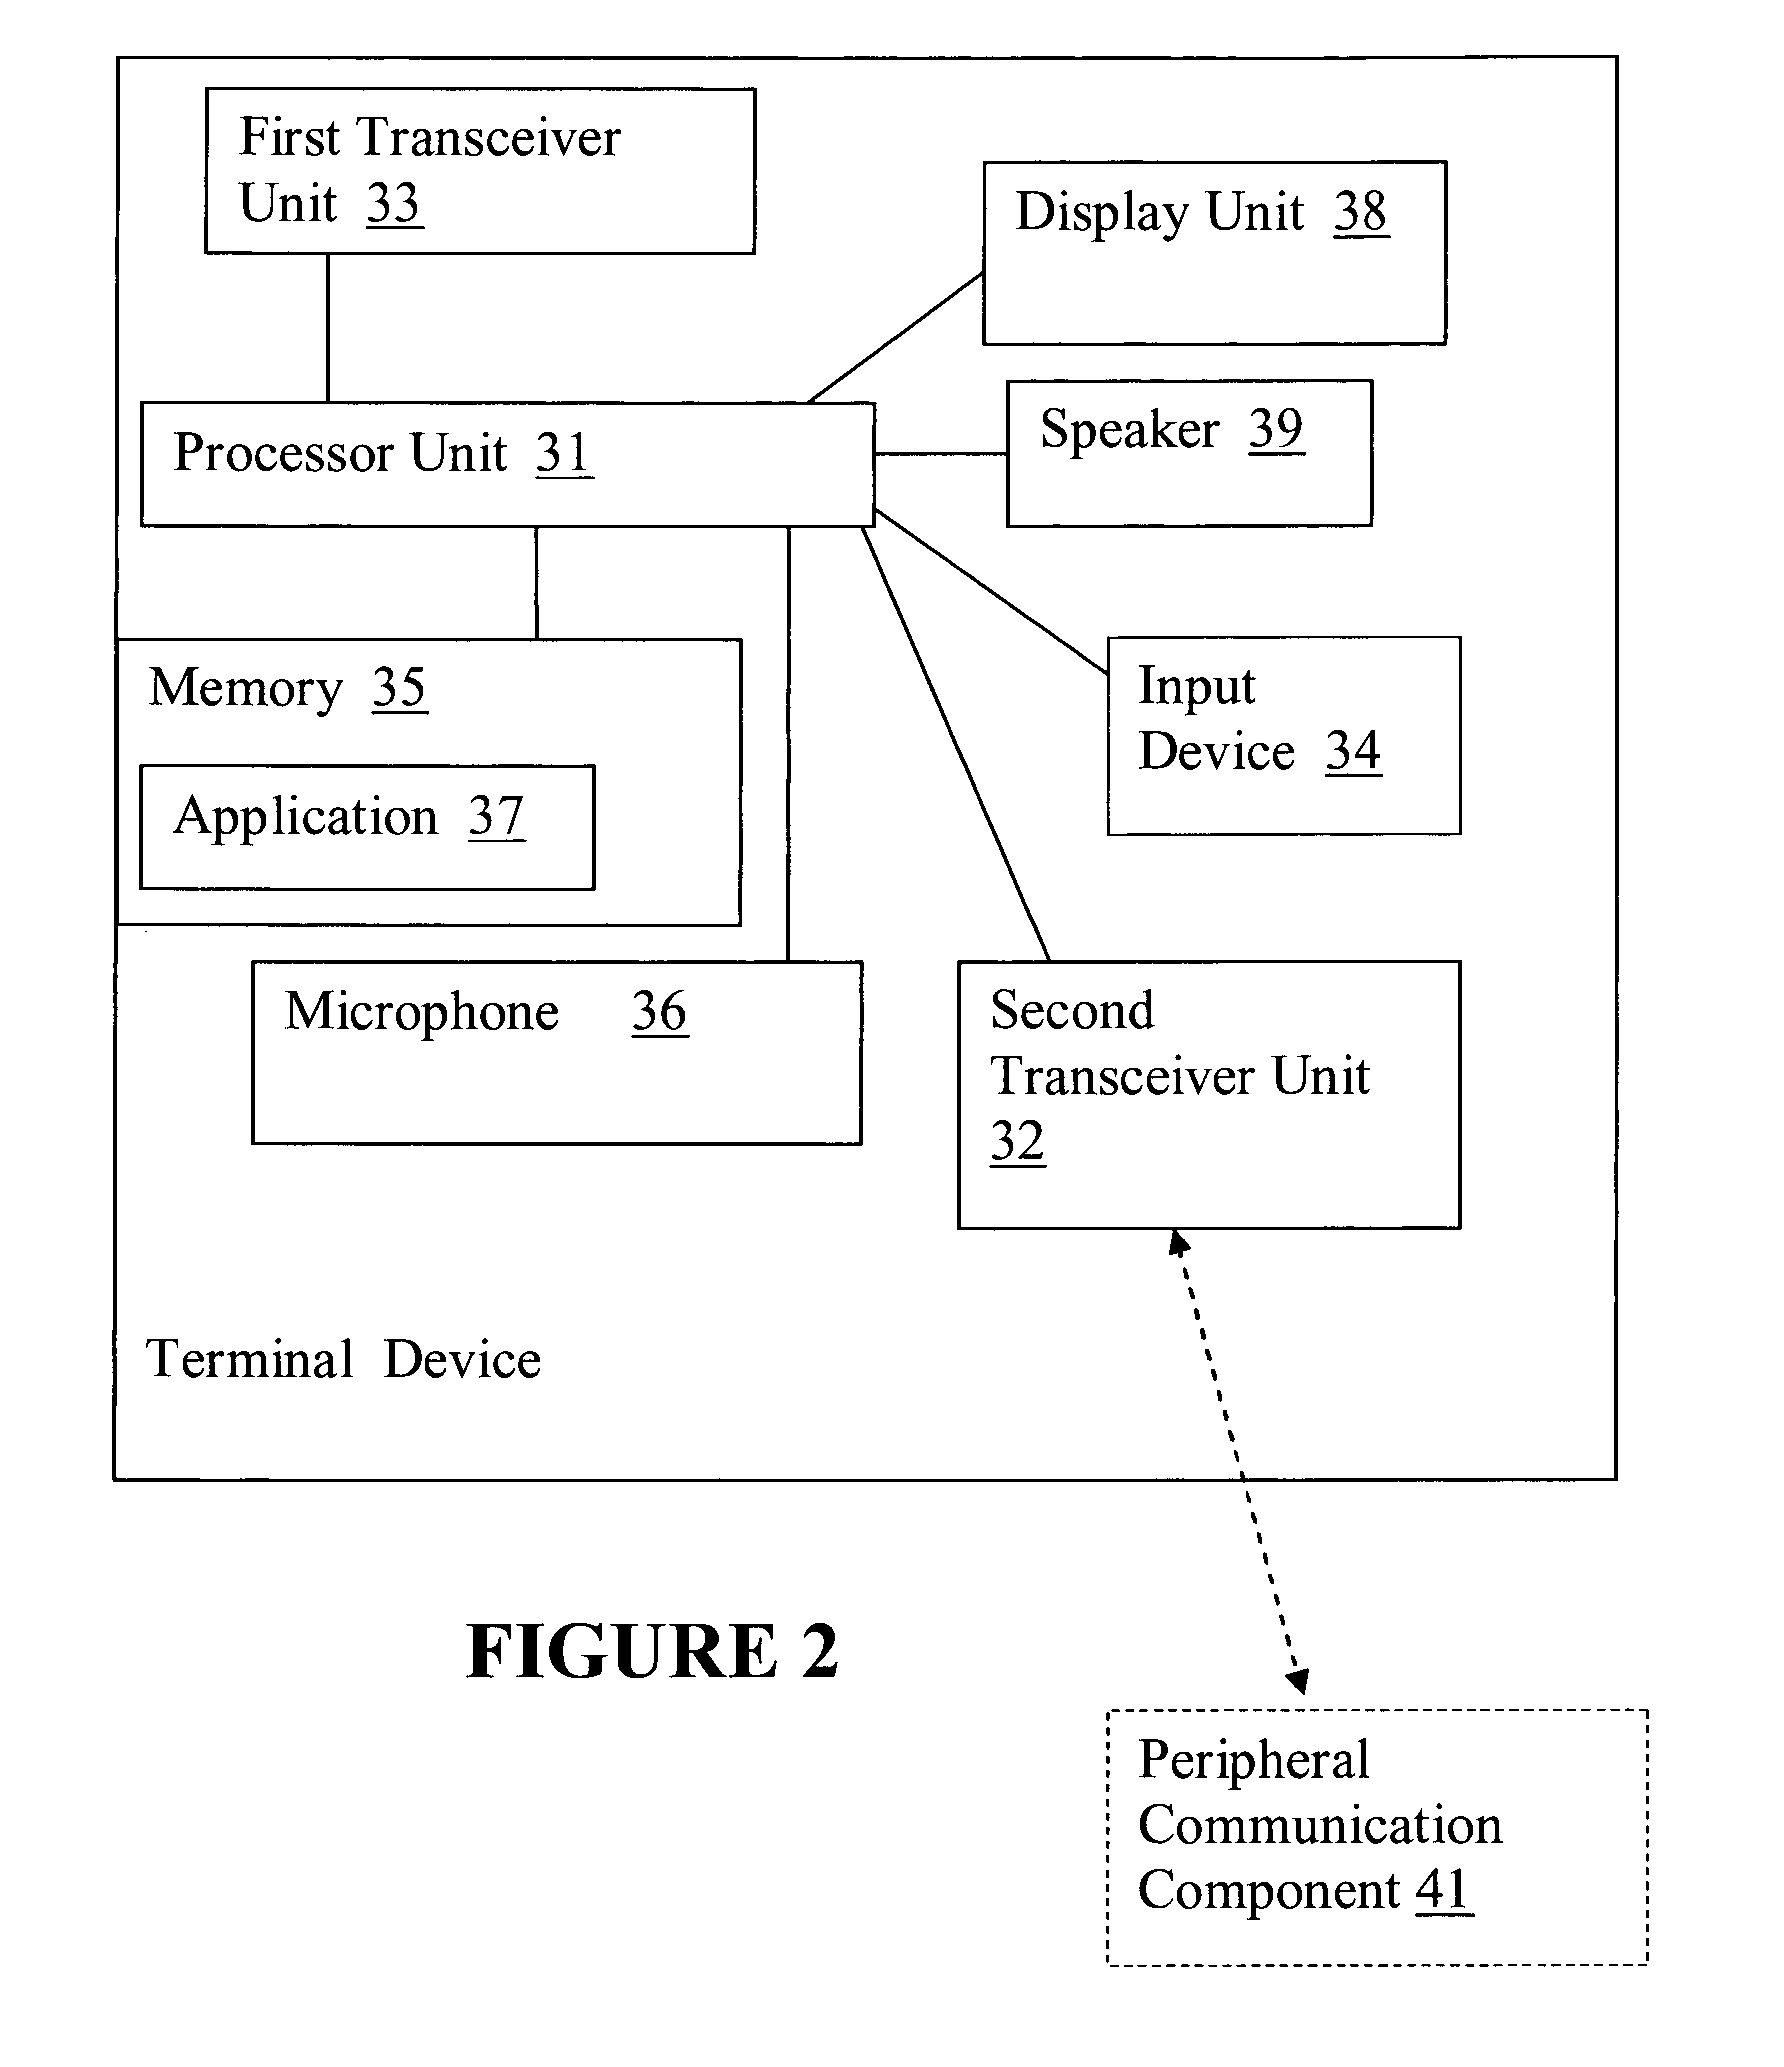 System for deployment of communication terminals in a cloud computing system